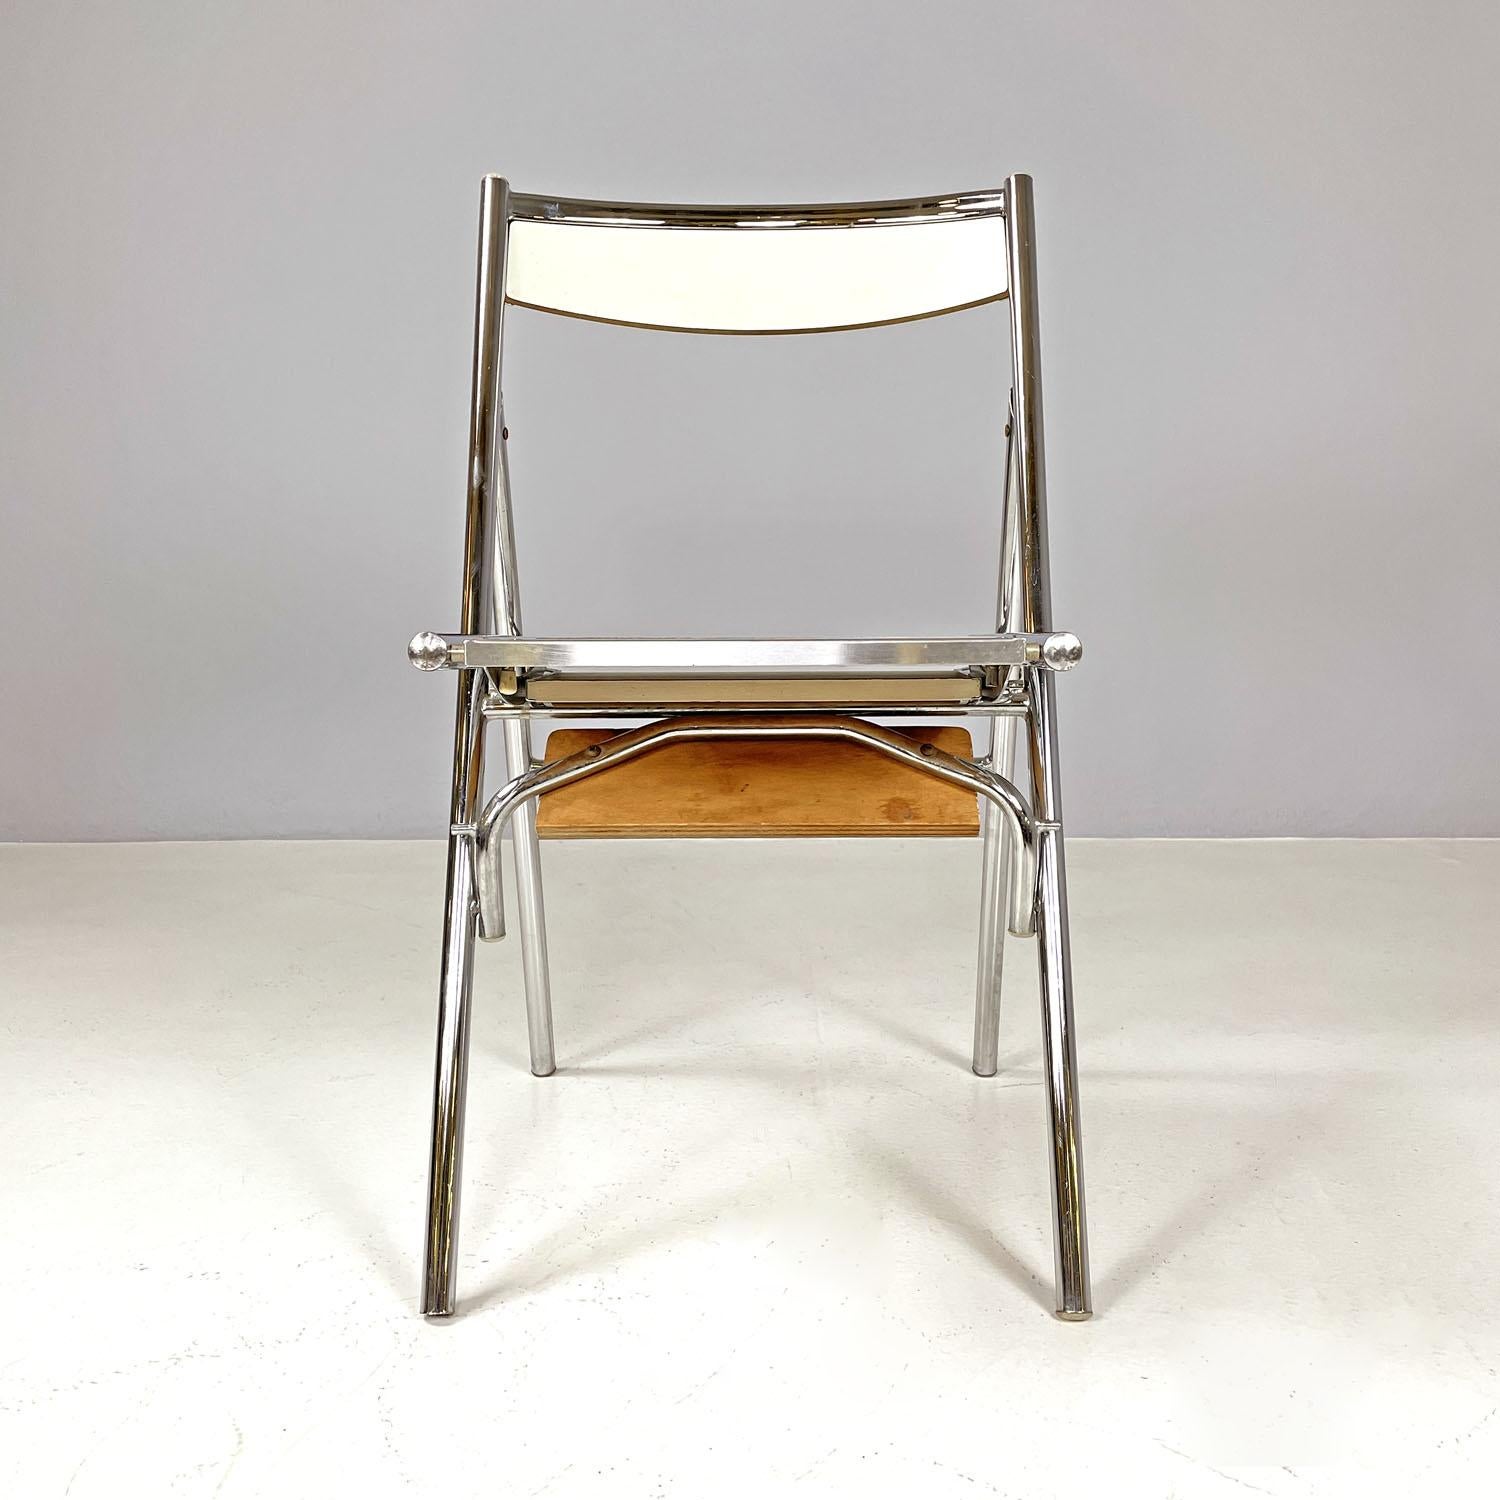 Late 20th Century Italian modern steel and white laminate chair convertible into a ladder, 1970s